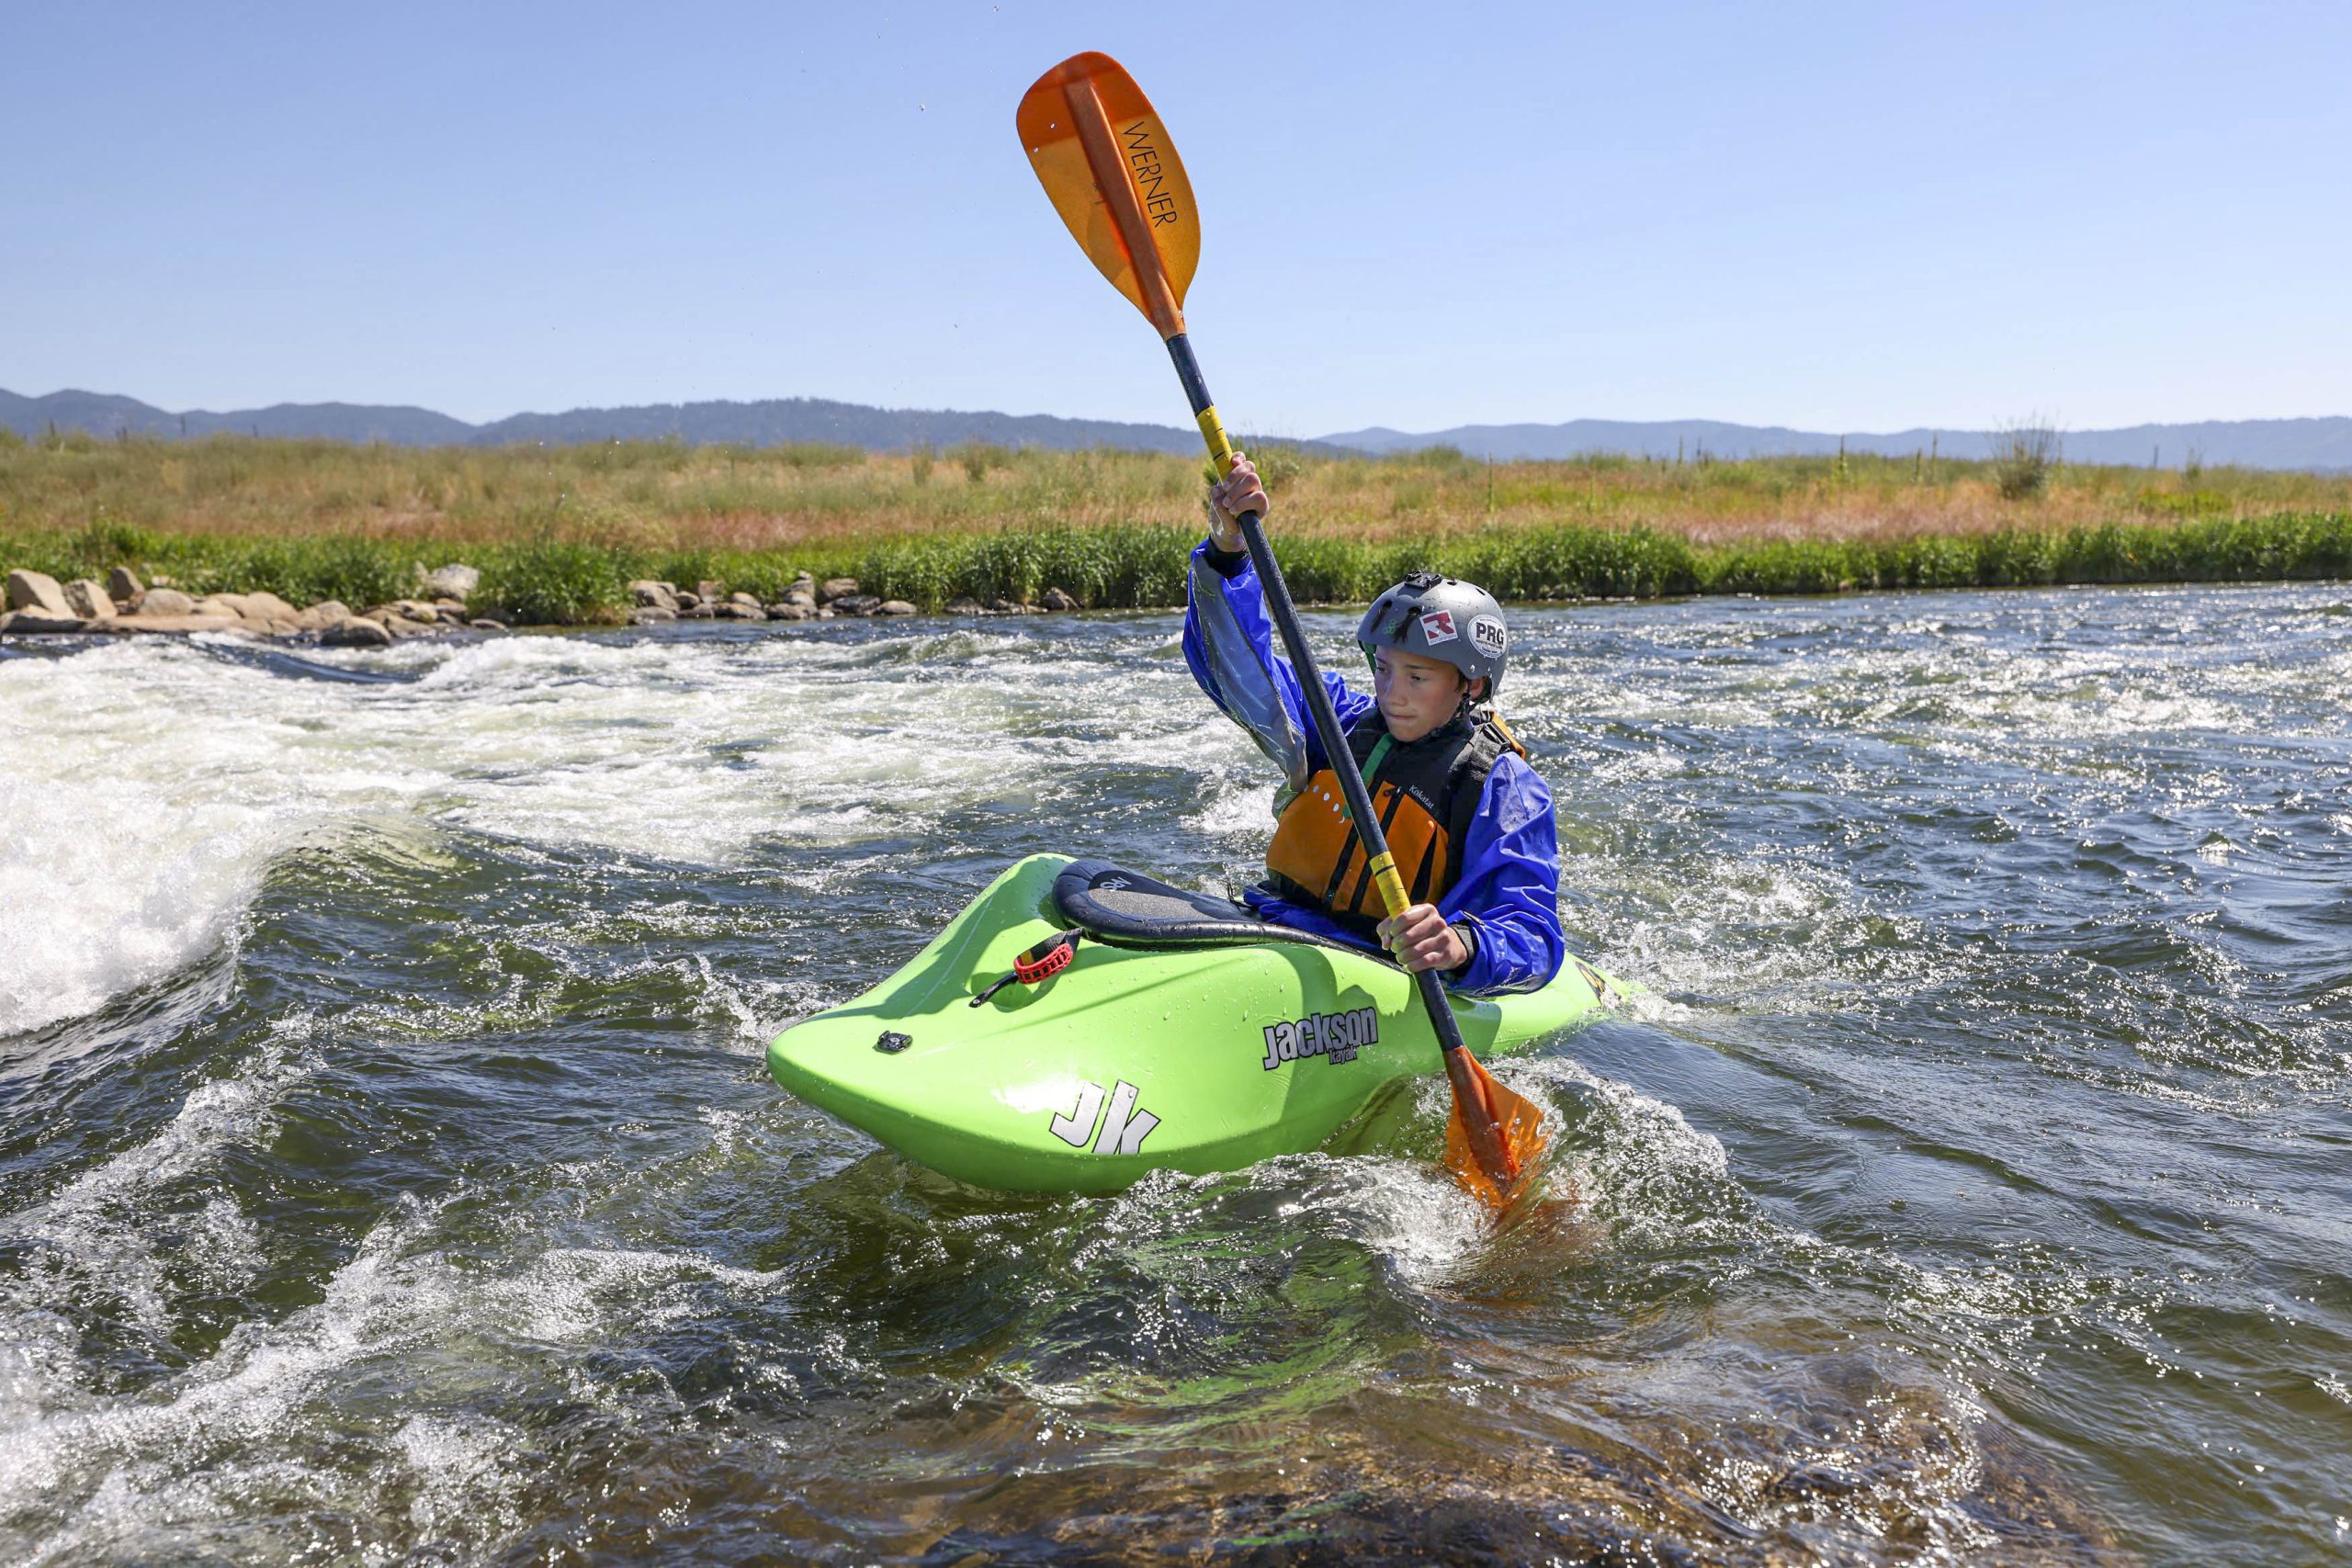 Slice of Life: Kelly’s Whitewater Park Academy